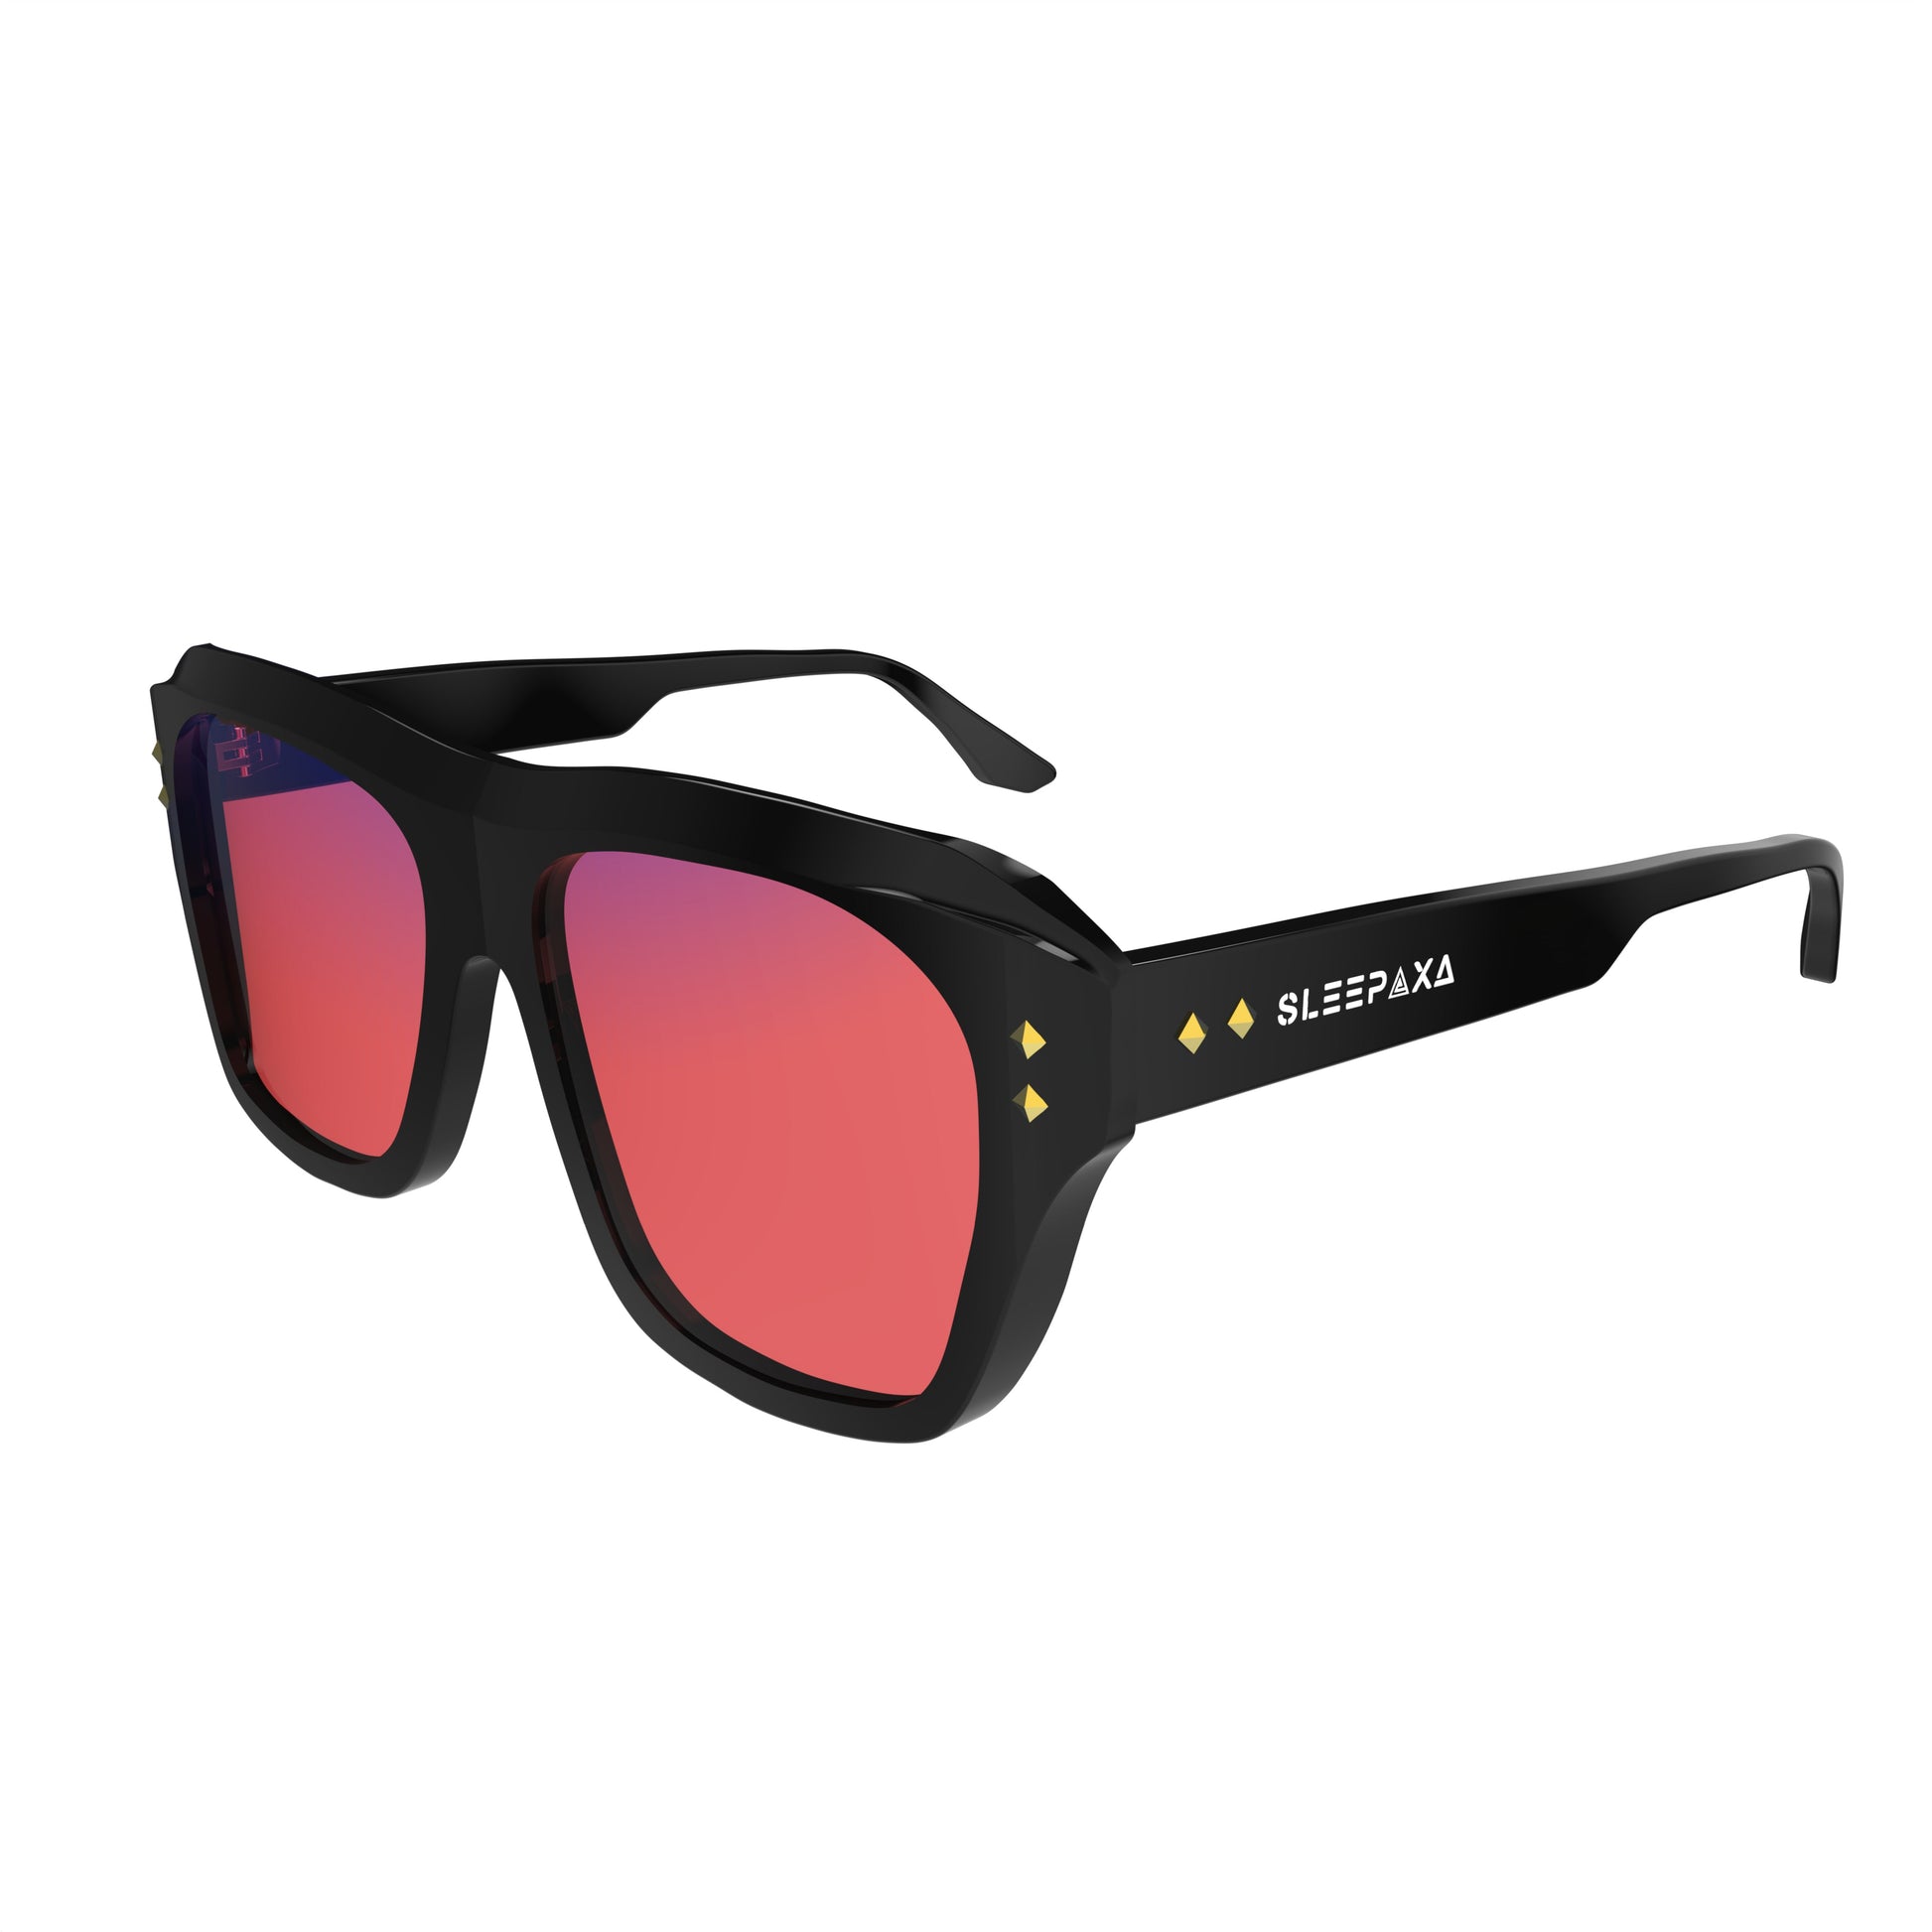 Side View of Sleepaxa Celestial FL-41 Migraine Glasses with black frame, Acetate temples, and rose-tinted lenses with blue block and blue anti reflection properties , designed with smooth high-quality Acetate frame material for Migraine & Light Sensitivity